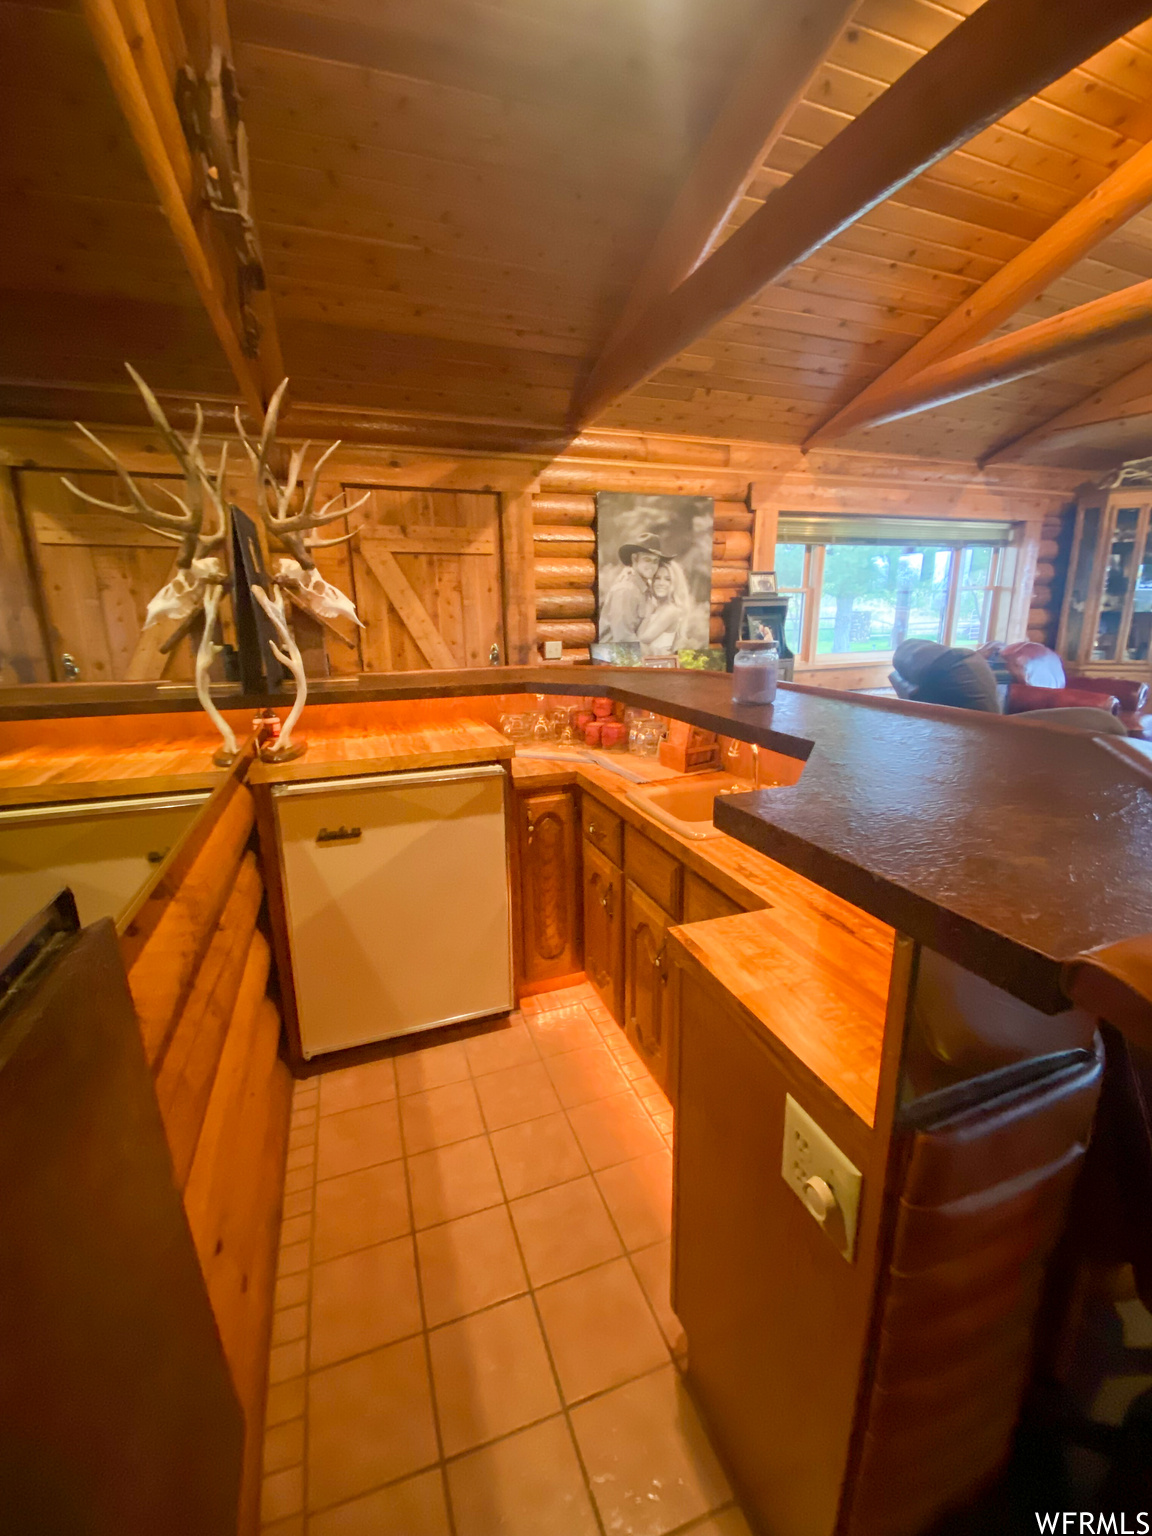 Kitchen featuring light tile floors, wood ceiling, kitchen peninsula, vaulted ceiling with beams, and dishwashing machine